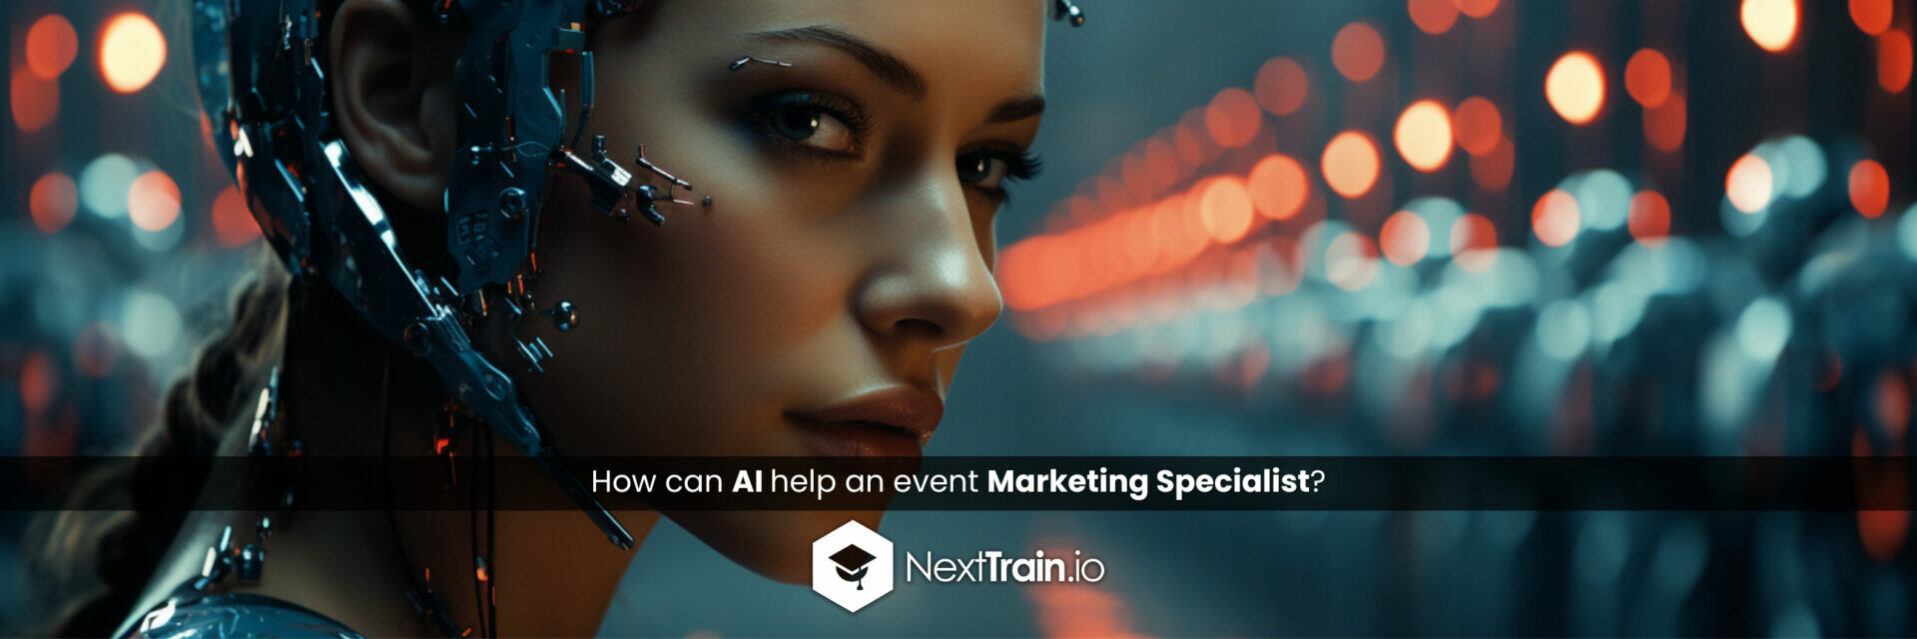 How can AI help an event Marketing Specialist?